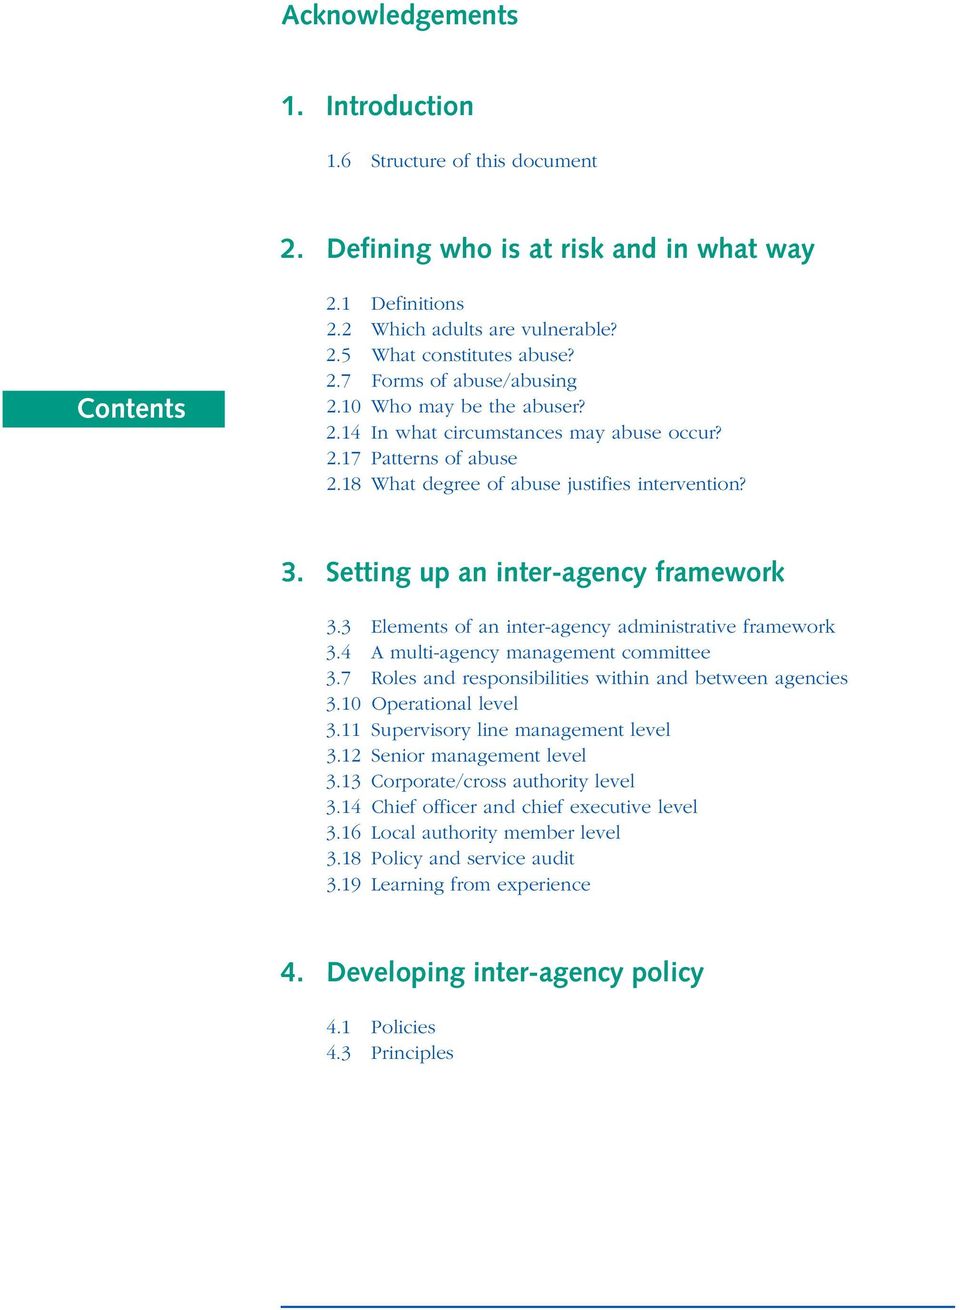 3 Elements of an inter-agency administrative framework 3.4 A multi-agency management committee 3.7 Roles and responsibilities within and between agencies 3.10 Operational level 3.